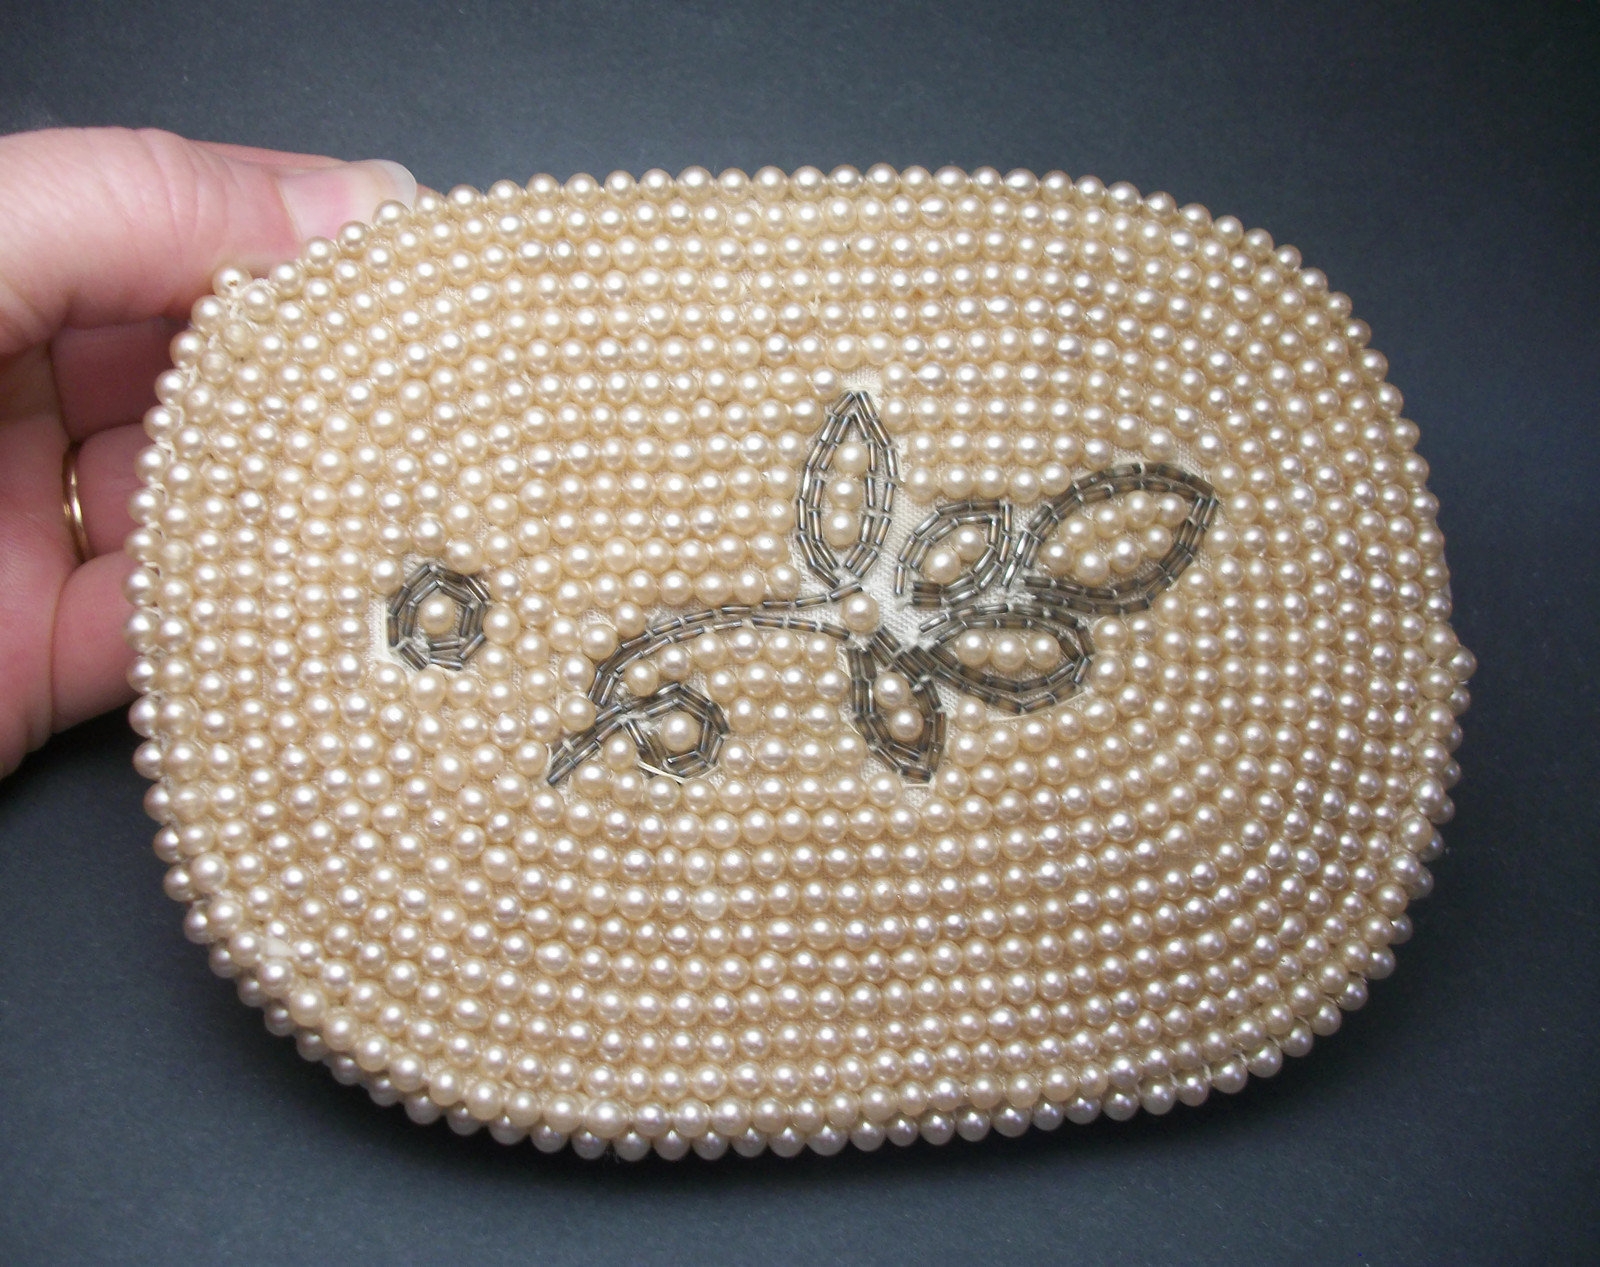 Vintage 1950s Made in Japan Faux Pearl Beaded Clutch 50s Formal Small  Evening Bag with Floral Bead Design 5 5/8 x 4 x 3/4